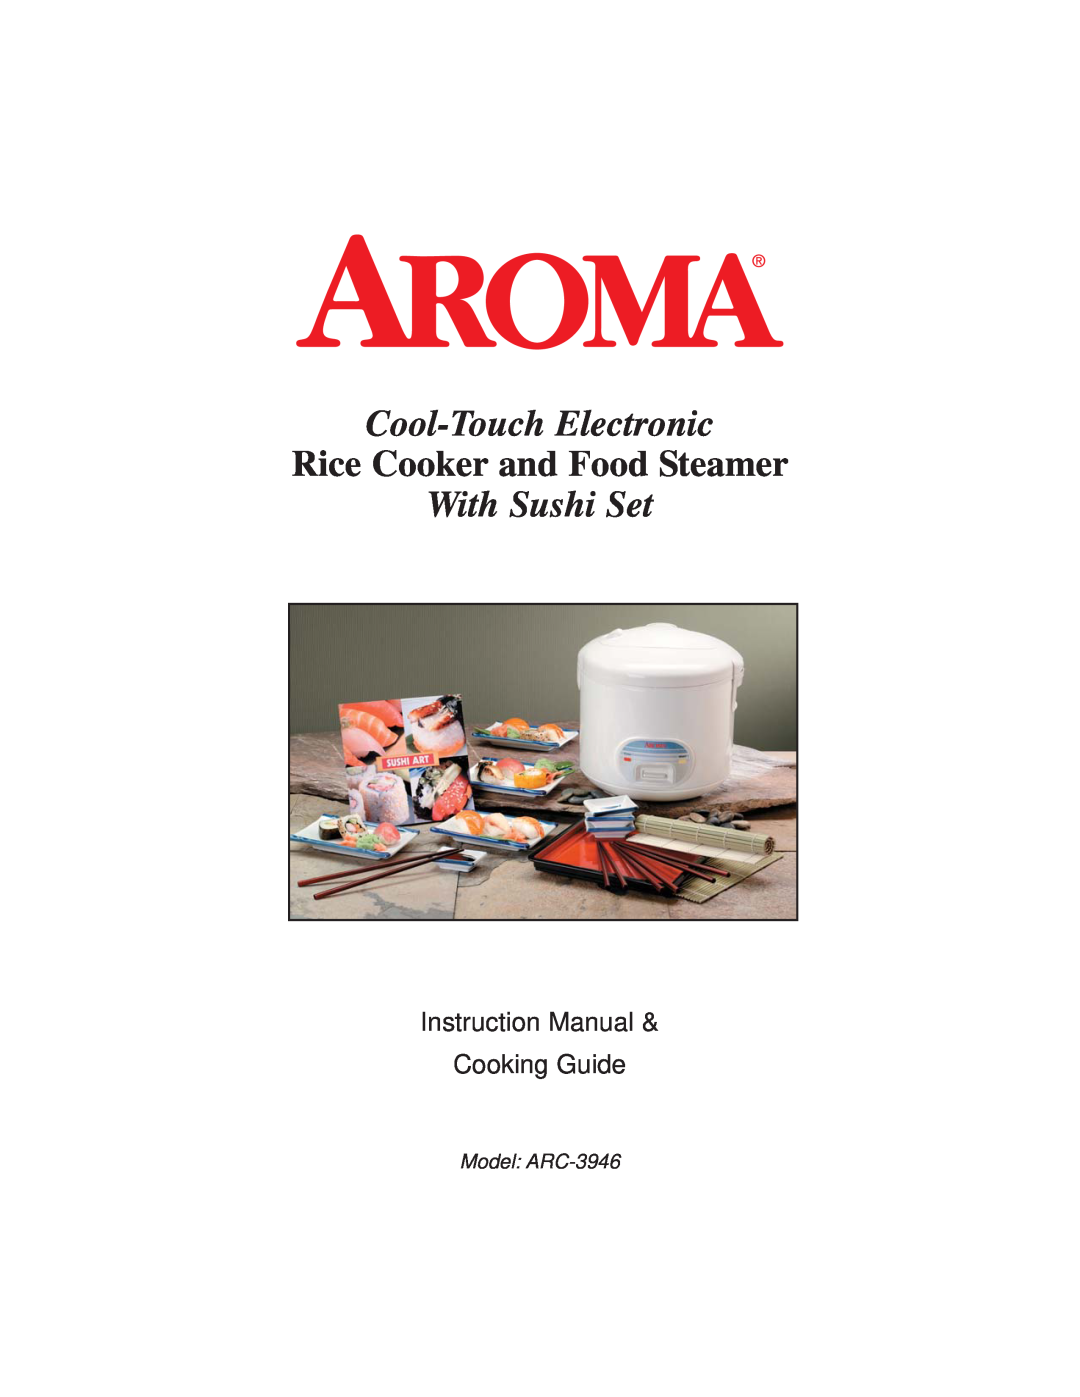 Aroma ARC3946 instruction manual Cool-Touch Electronic, Rice Cooker and Food Steamer, With Sushi Set, Model ARC-3946 